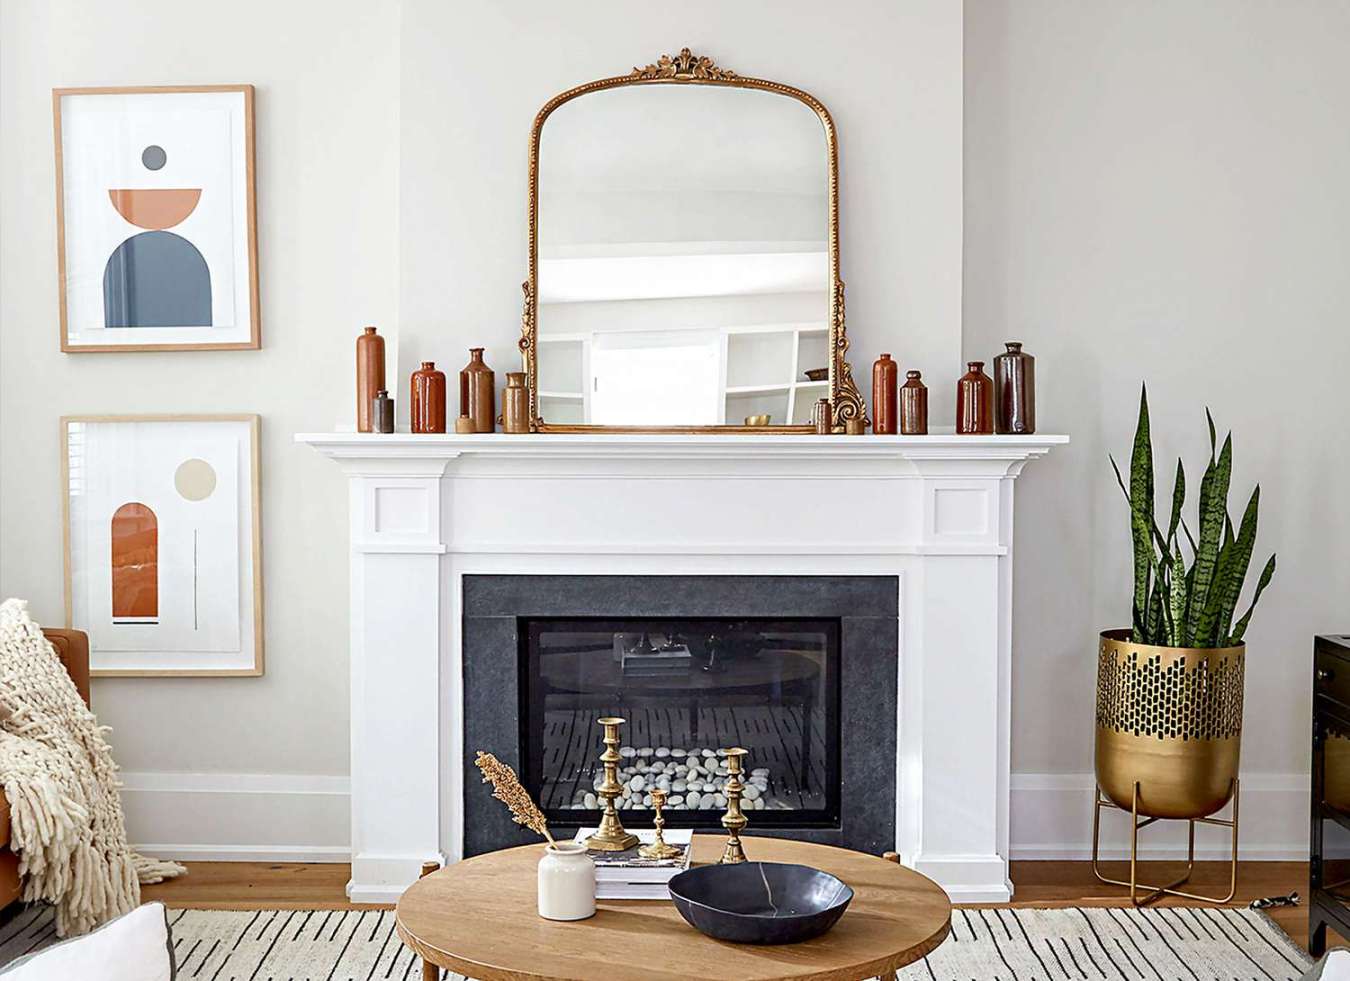 Ideas for Decorating With Mirrors That Will Instantly Transform